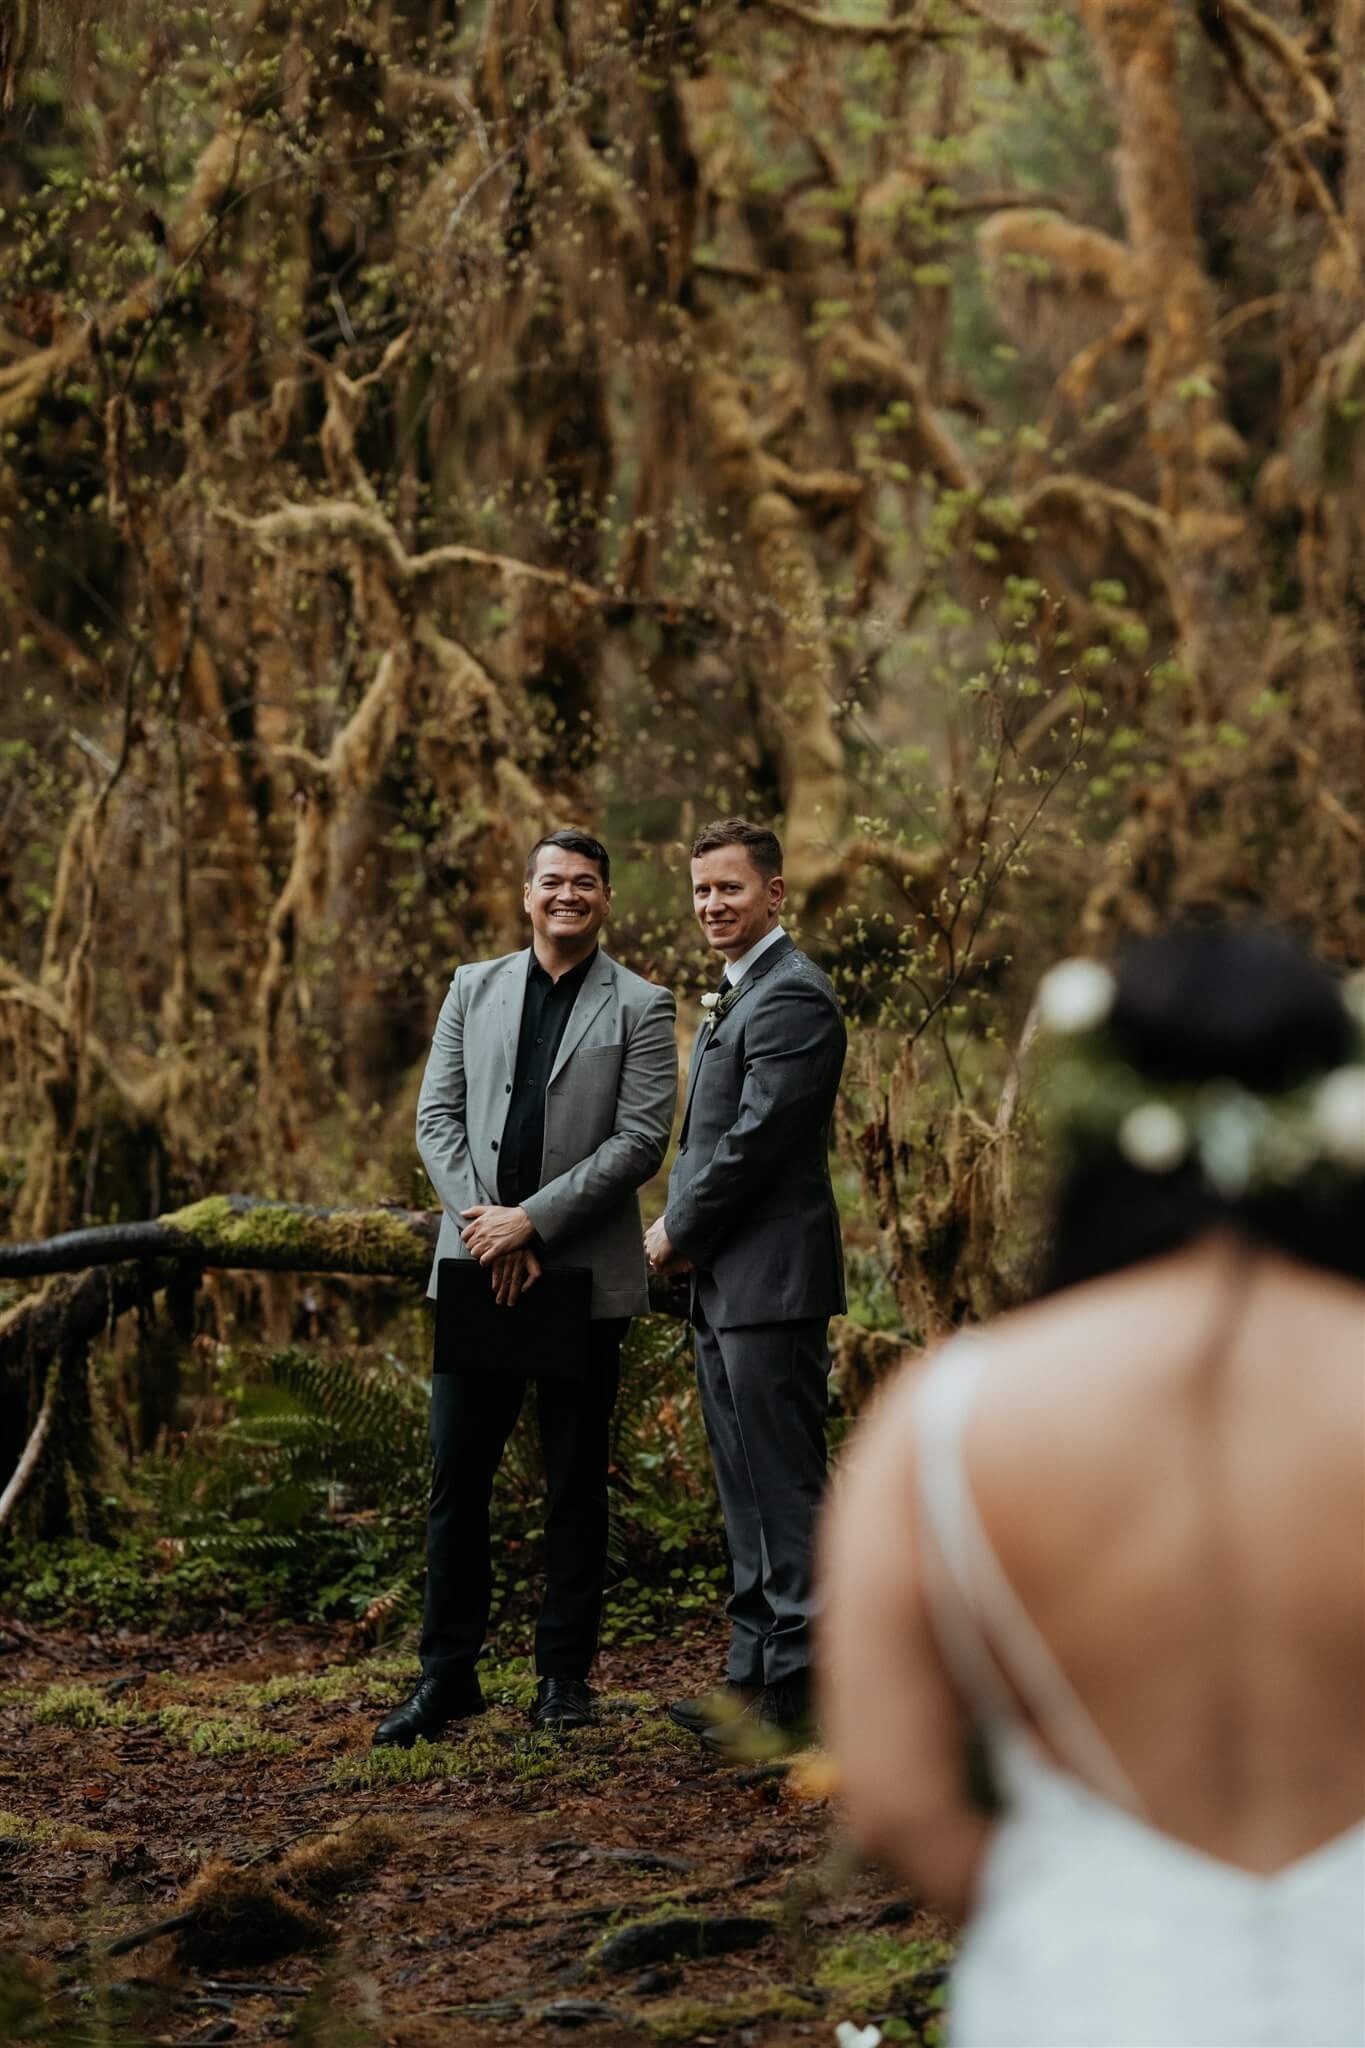 Groom waiting for bride at the end of aisle in the Hoh Rainforest